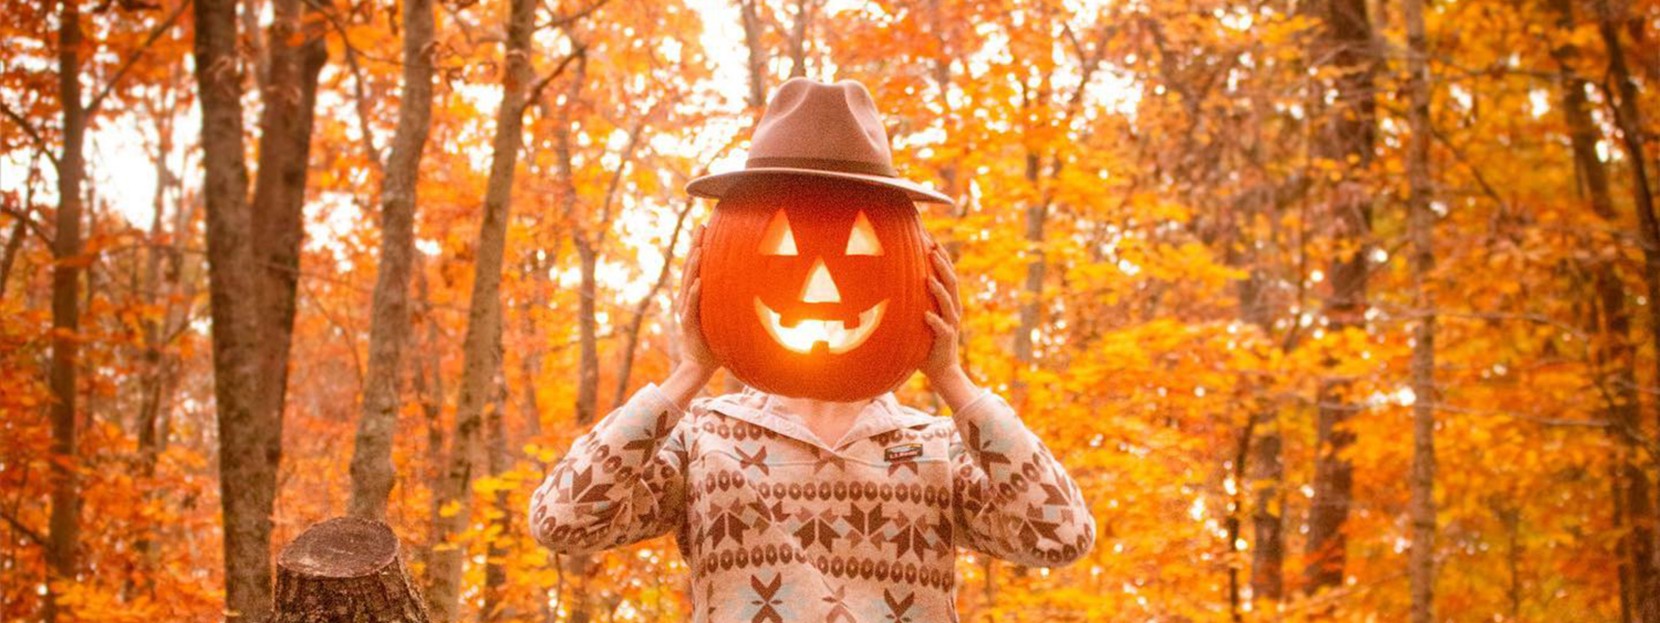 Woman outside holding a lit jack-o'lantern with hat in front of her head.